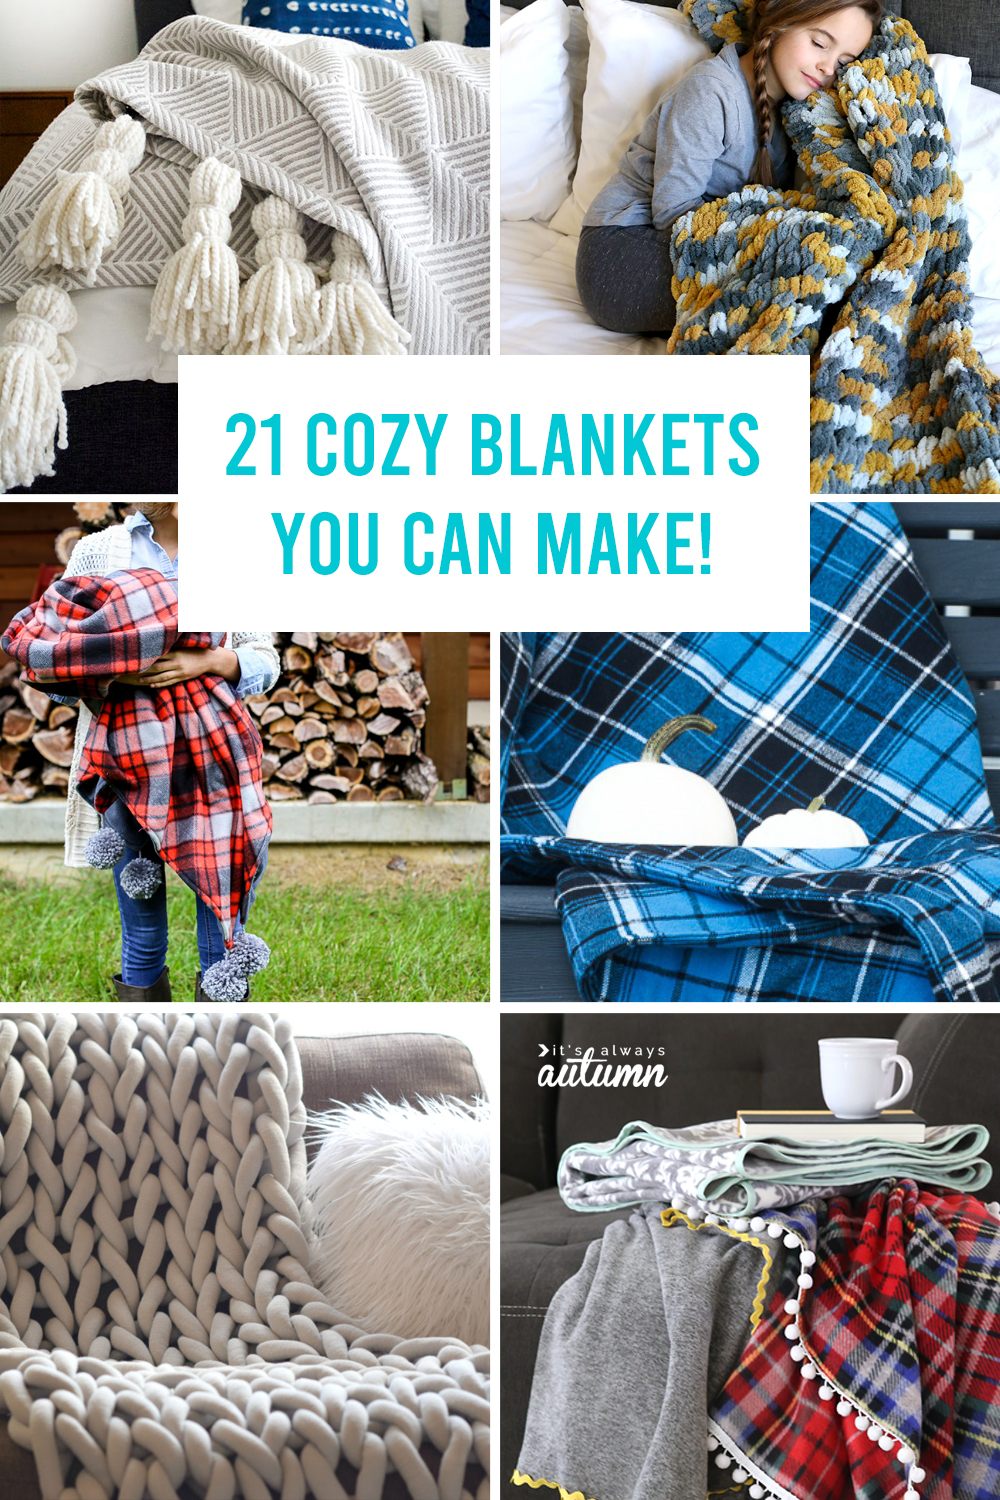 21 Cozy Blanket tutorials that will teach you how to make a blanket